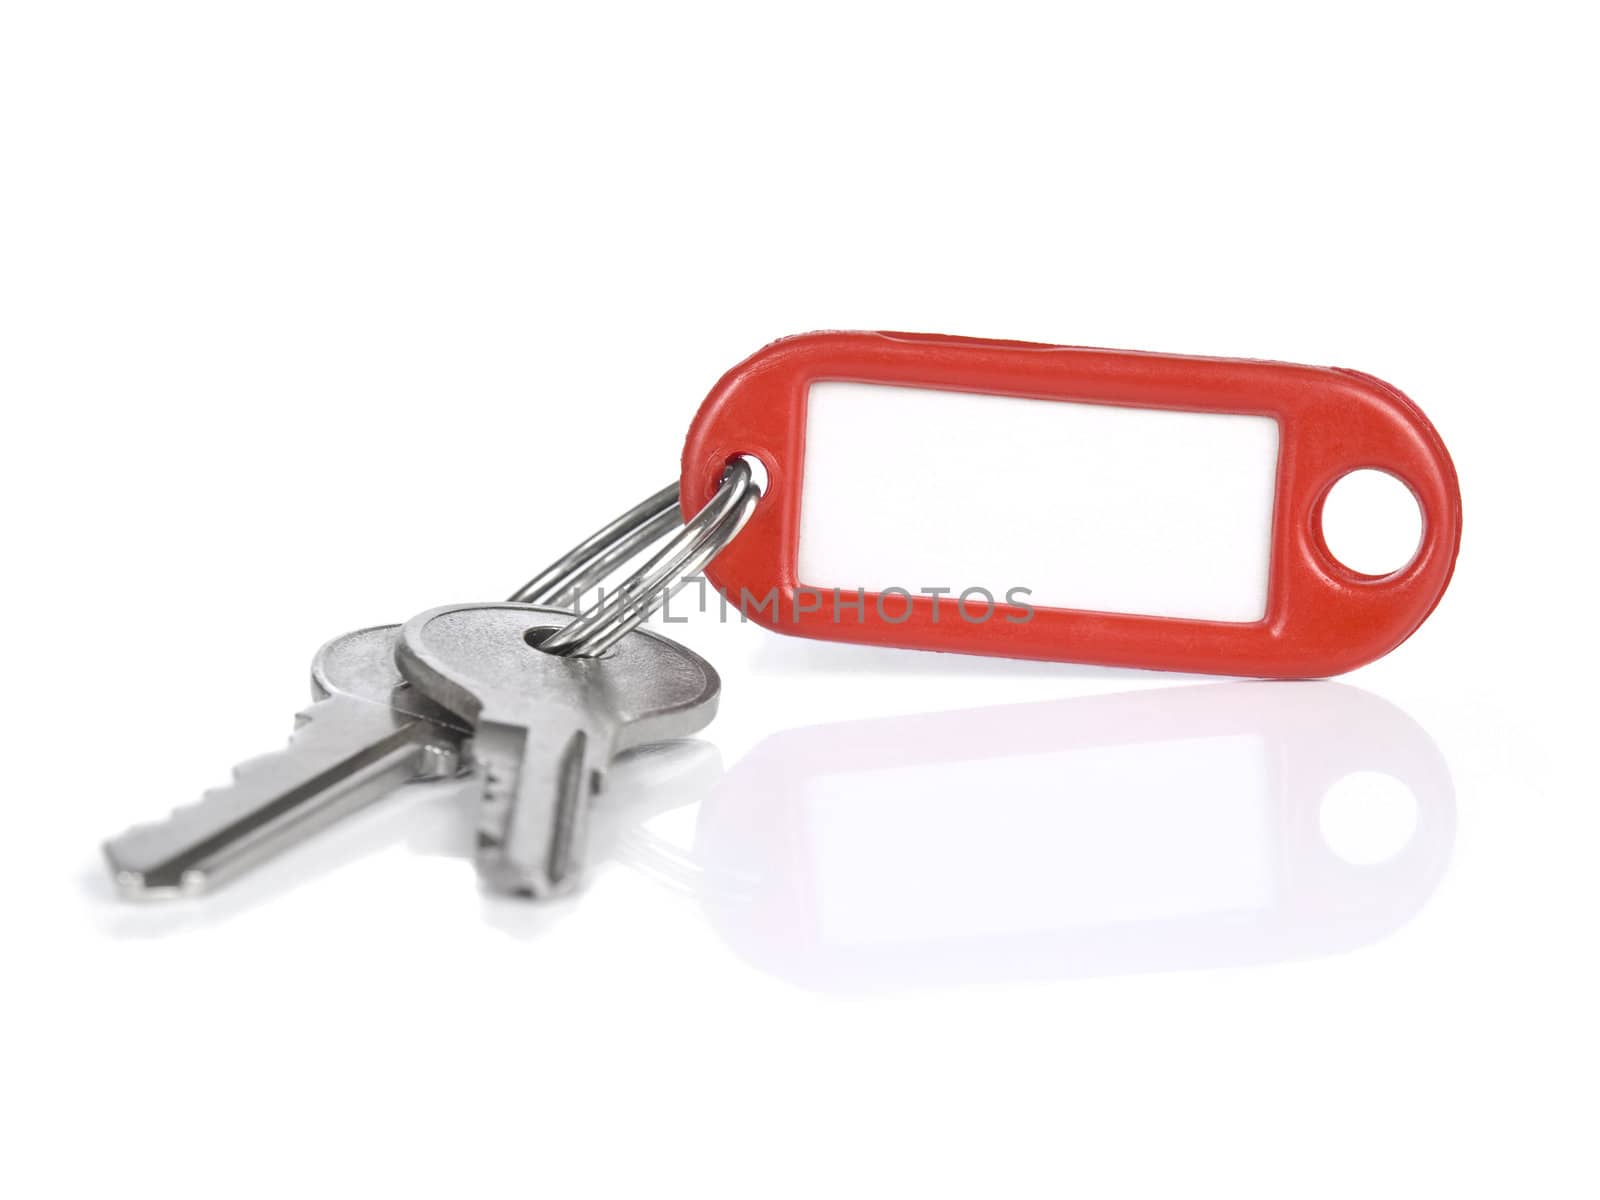 Two keys on a blank keyring with space for text, isolated on white.